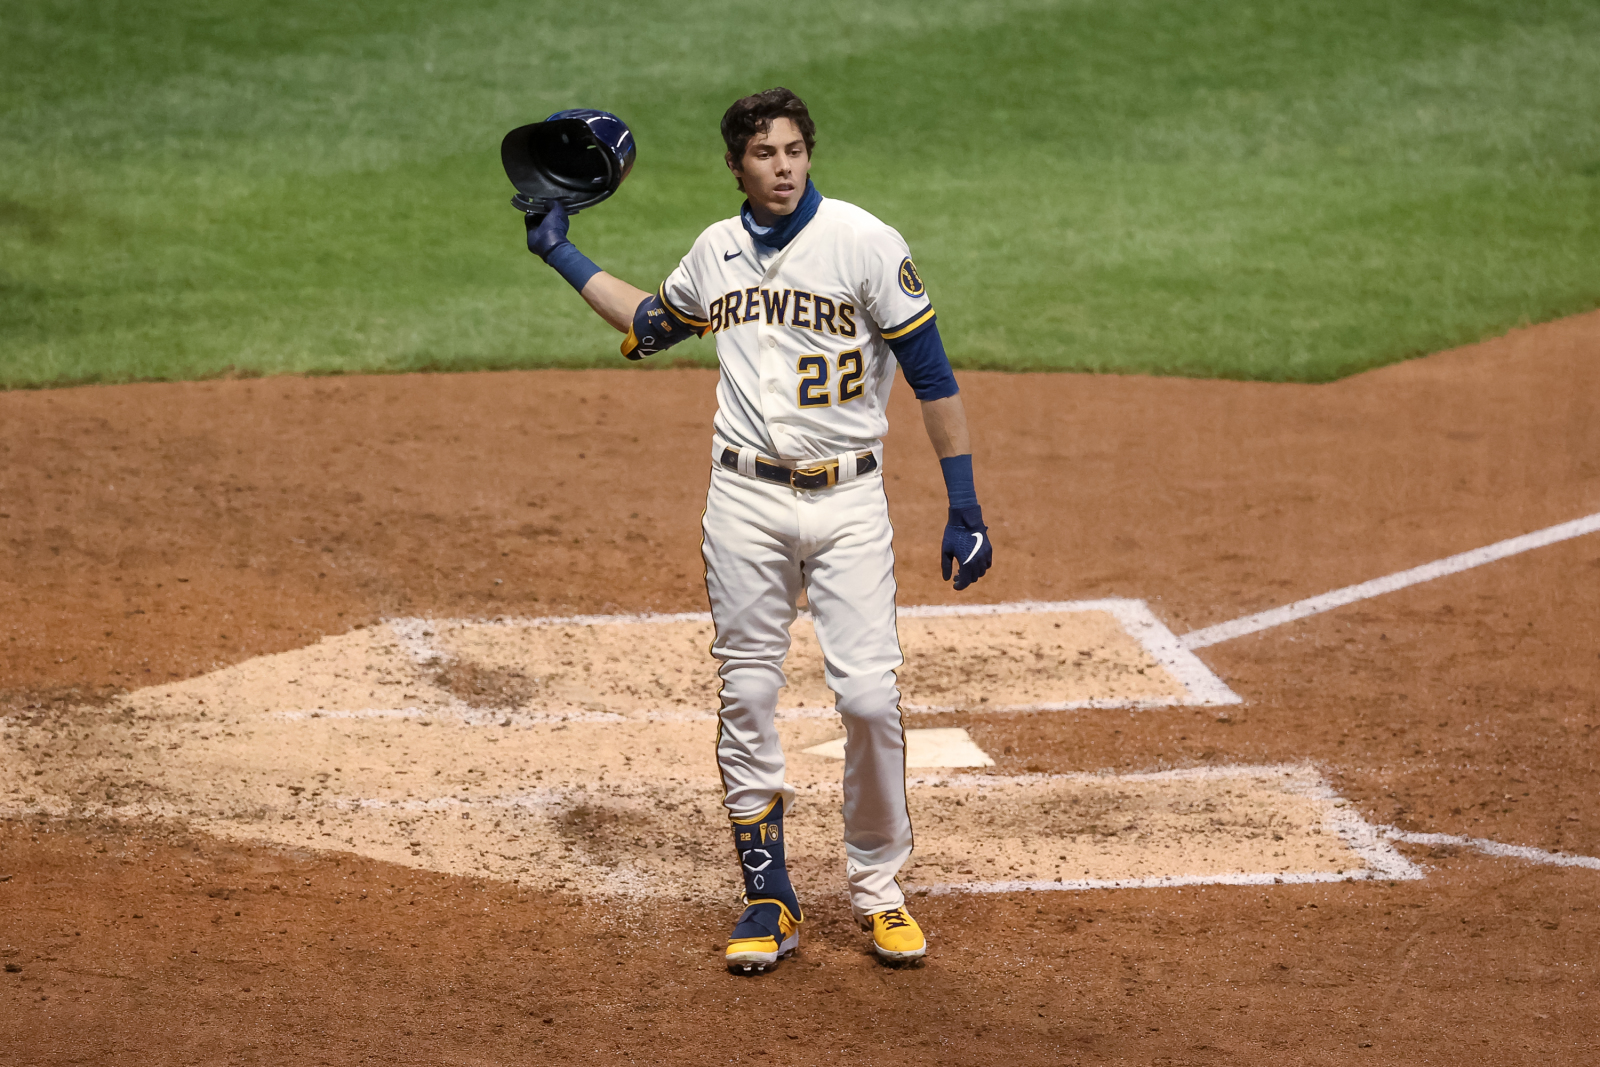 Brewers: Christian Yelich's Numbers are Right At His 2018 MVP Pace